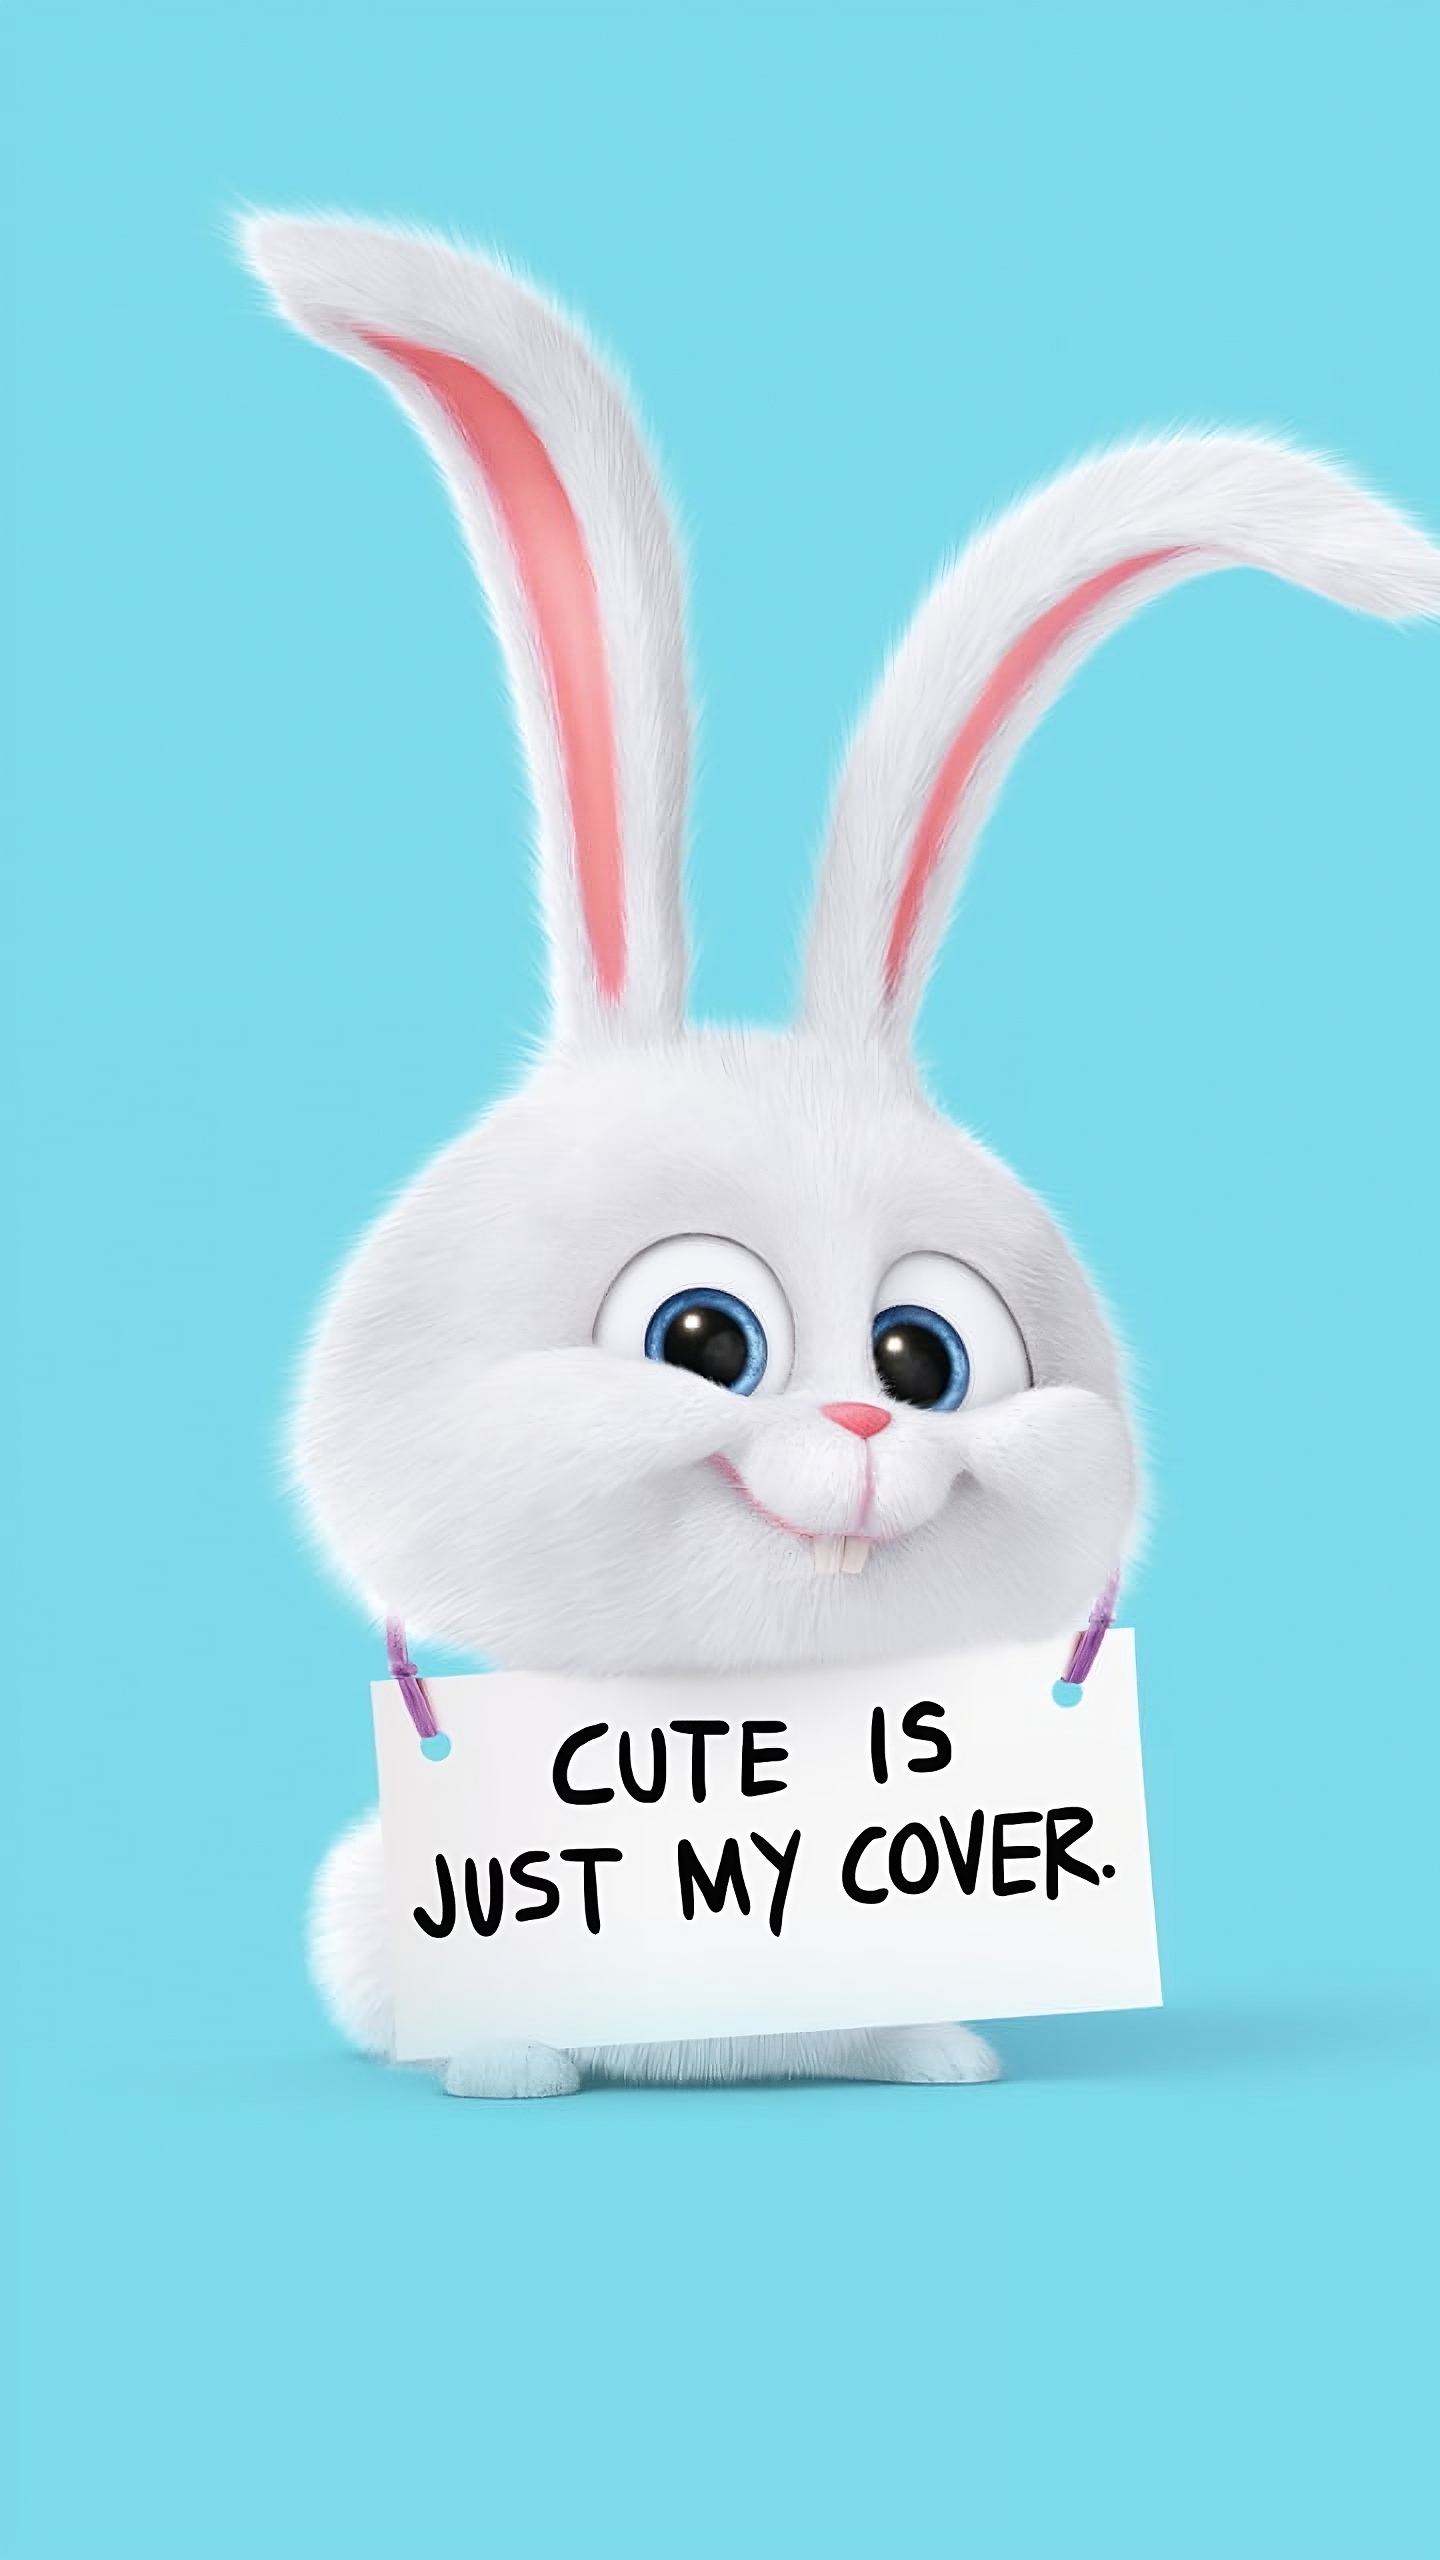 Snowball Rabbit - cute is just my cover